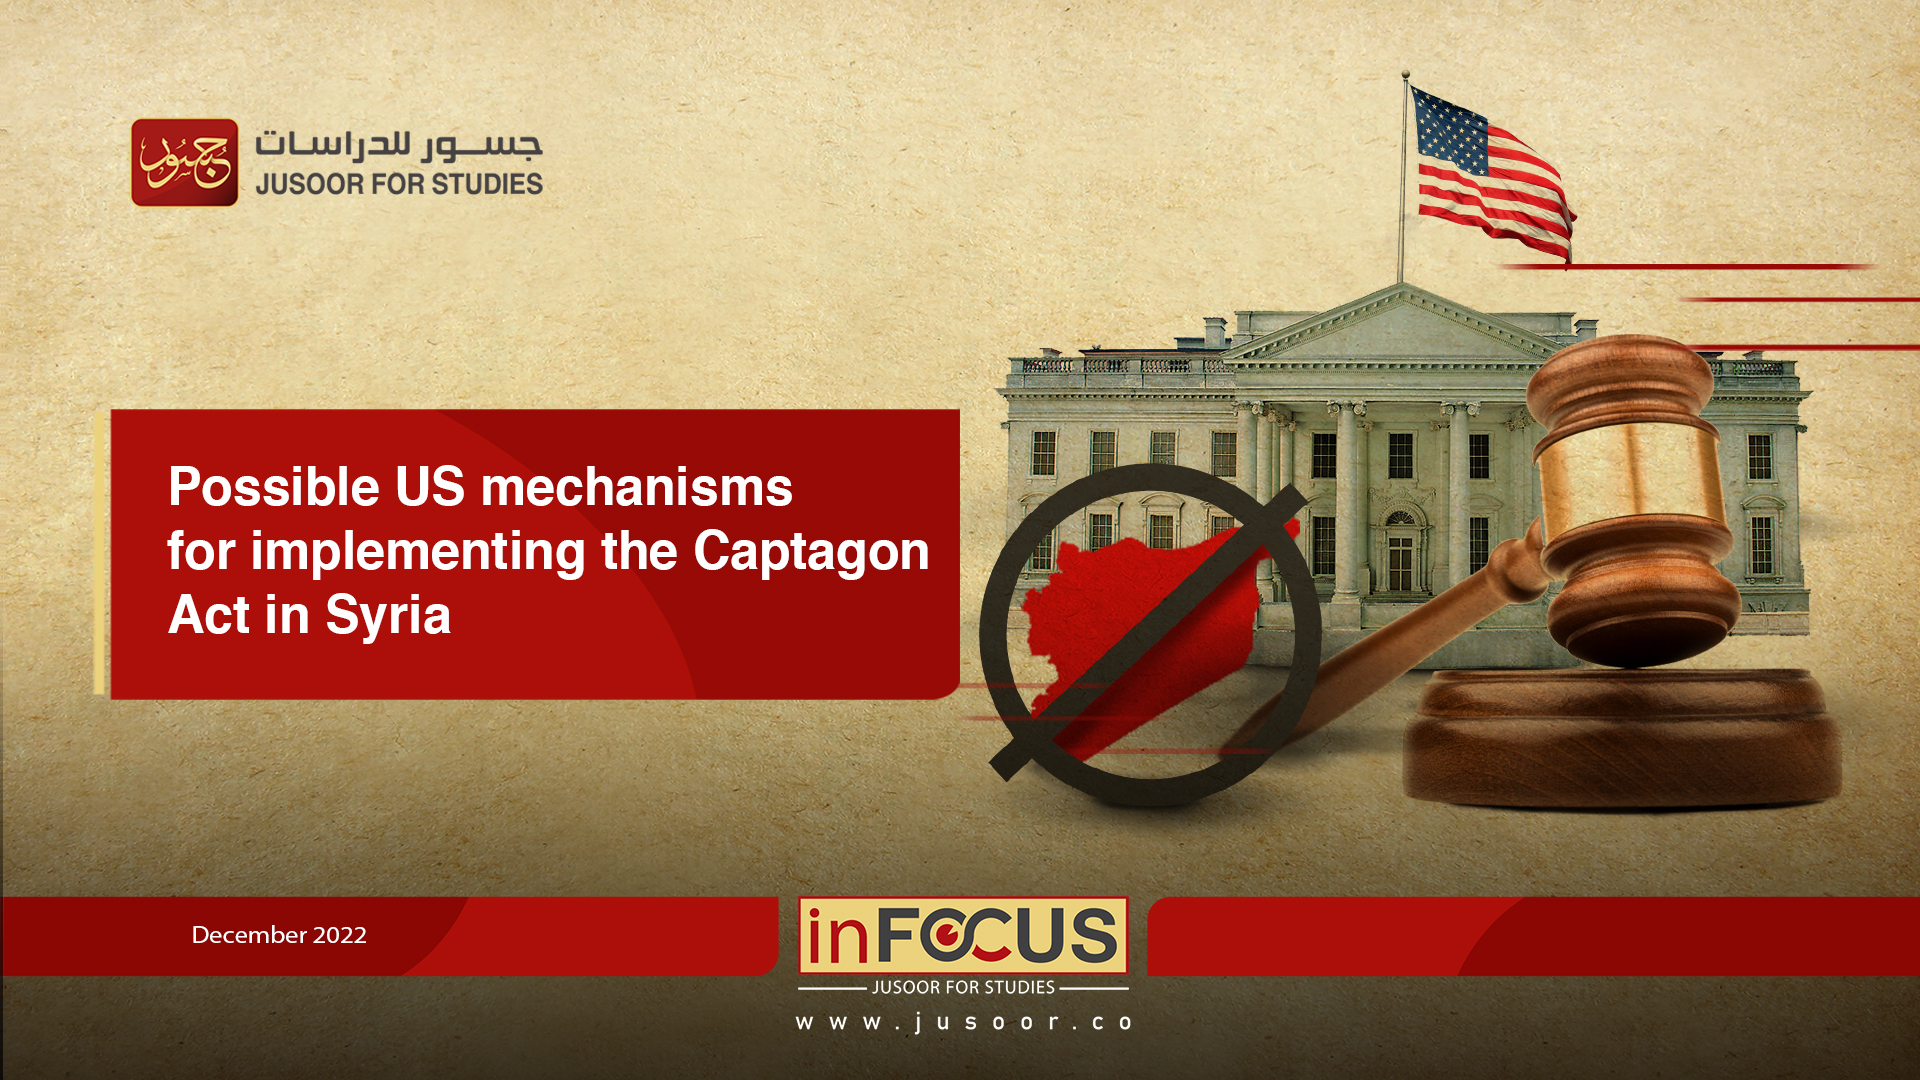 Possible US mechanisms for implementing the Captagon Act in Syria